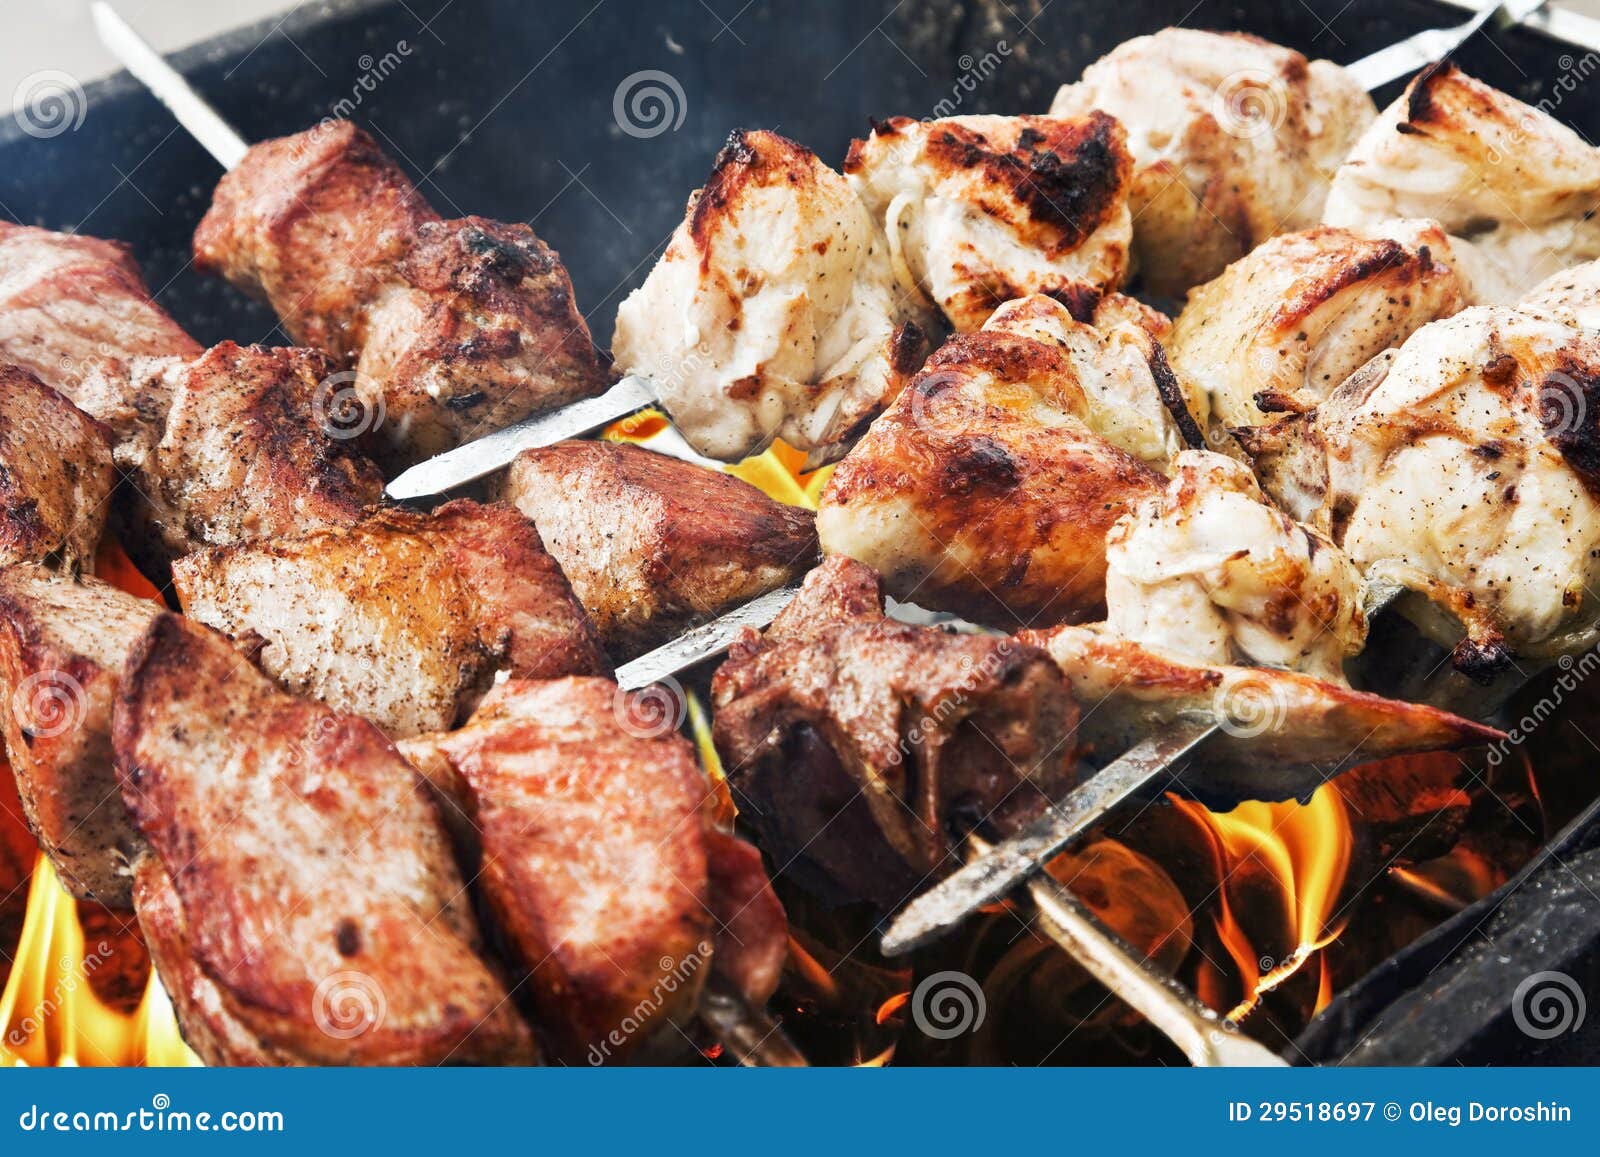 Juicy Slices of Pork and Chicken Cooked Over a Fire Stock Image - Image ...